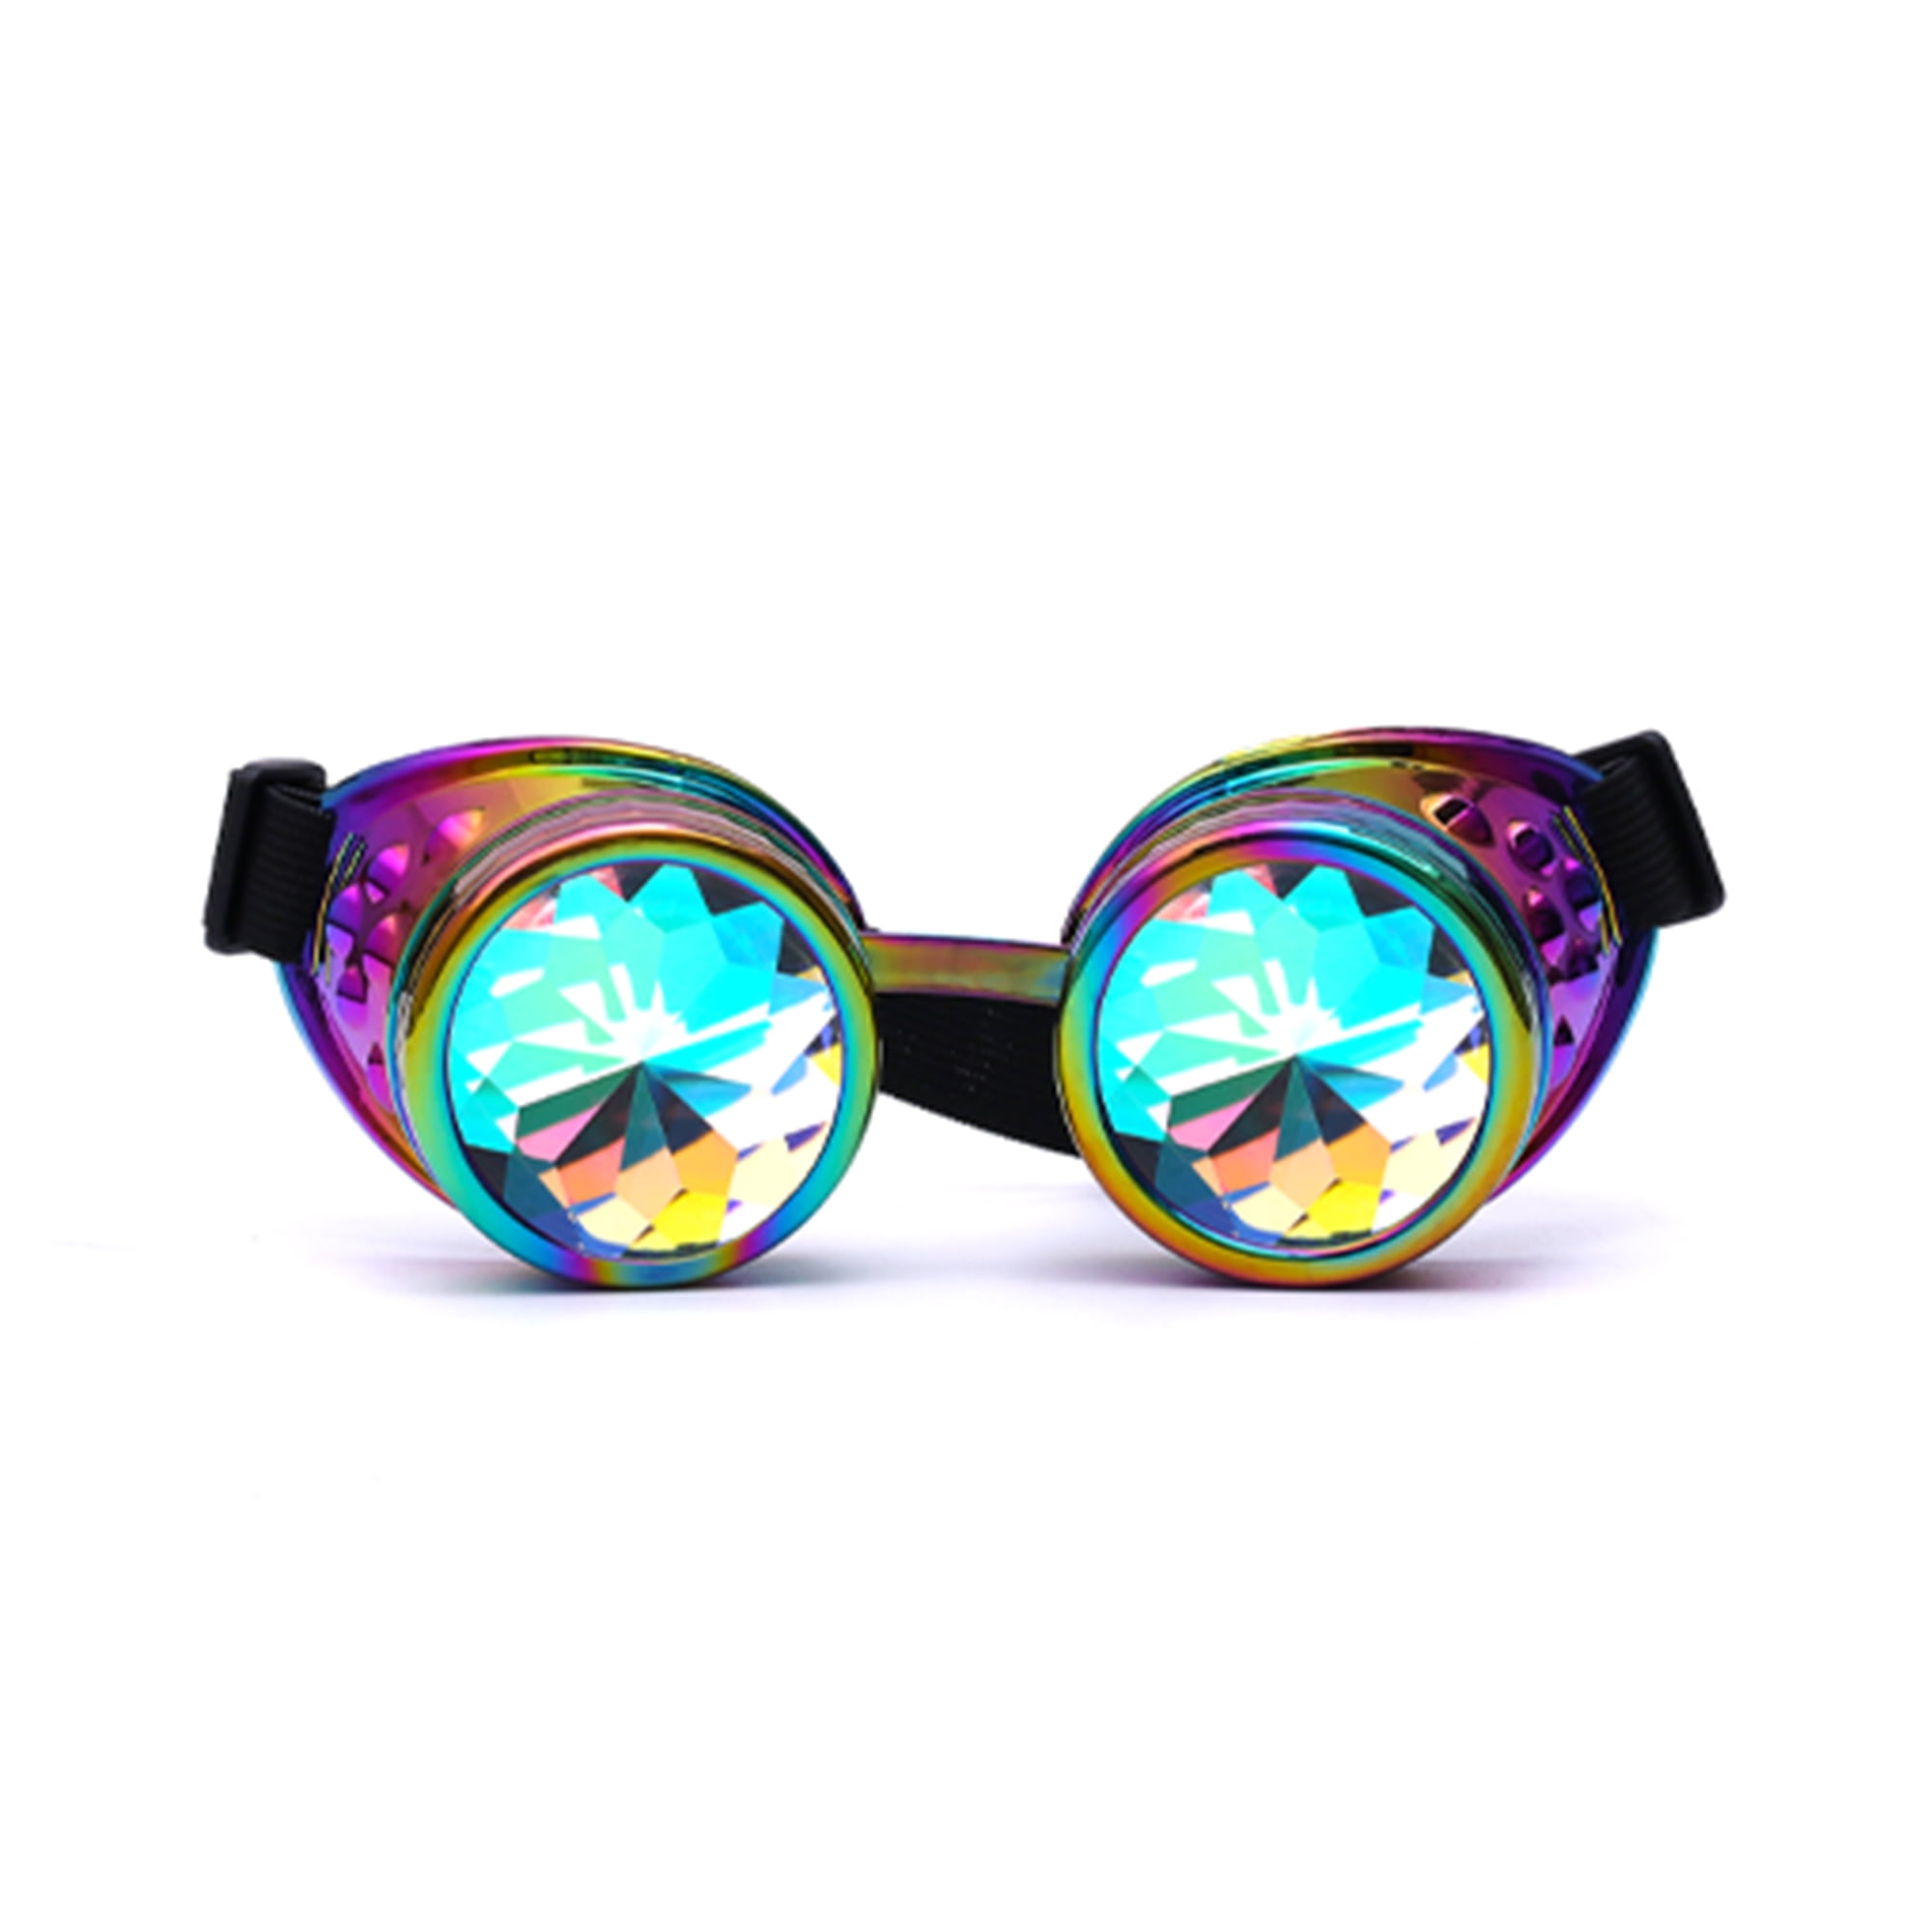 DODOING Rivet Steampunk Goggles Kaleidoscope Glasses with Double Color Lenses&Ocular Loupe Vintage Retro Welding Punk Gothic Cosplay Goggles Rainbow Rave Prism Diffraction Eyewear 